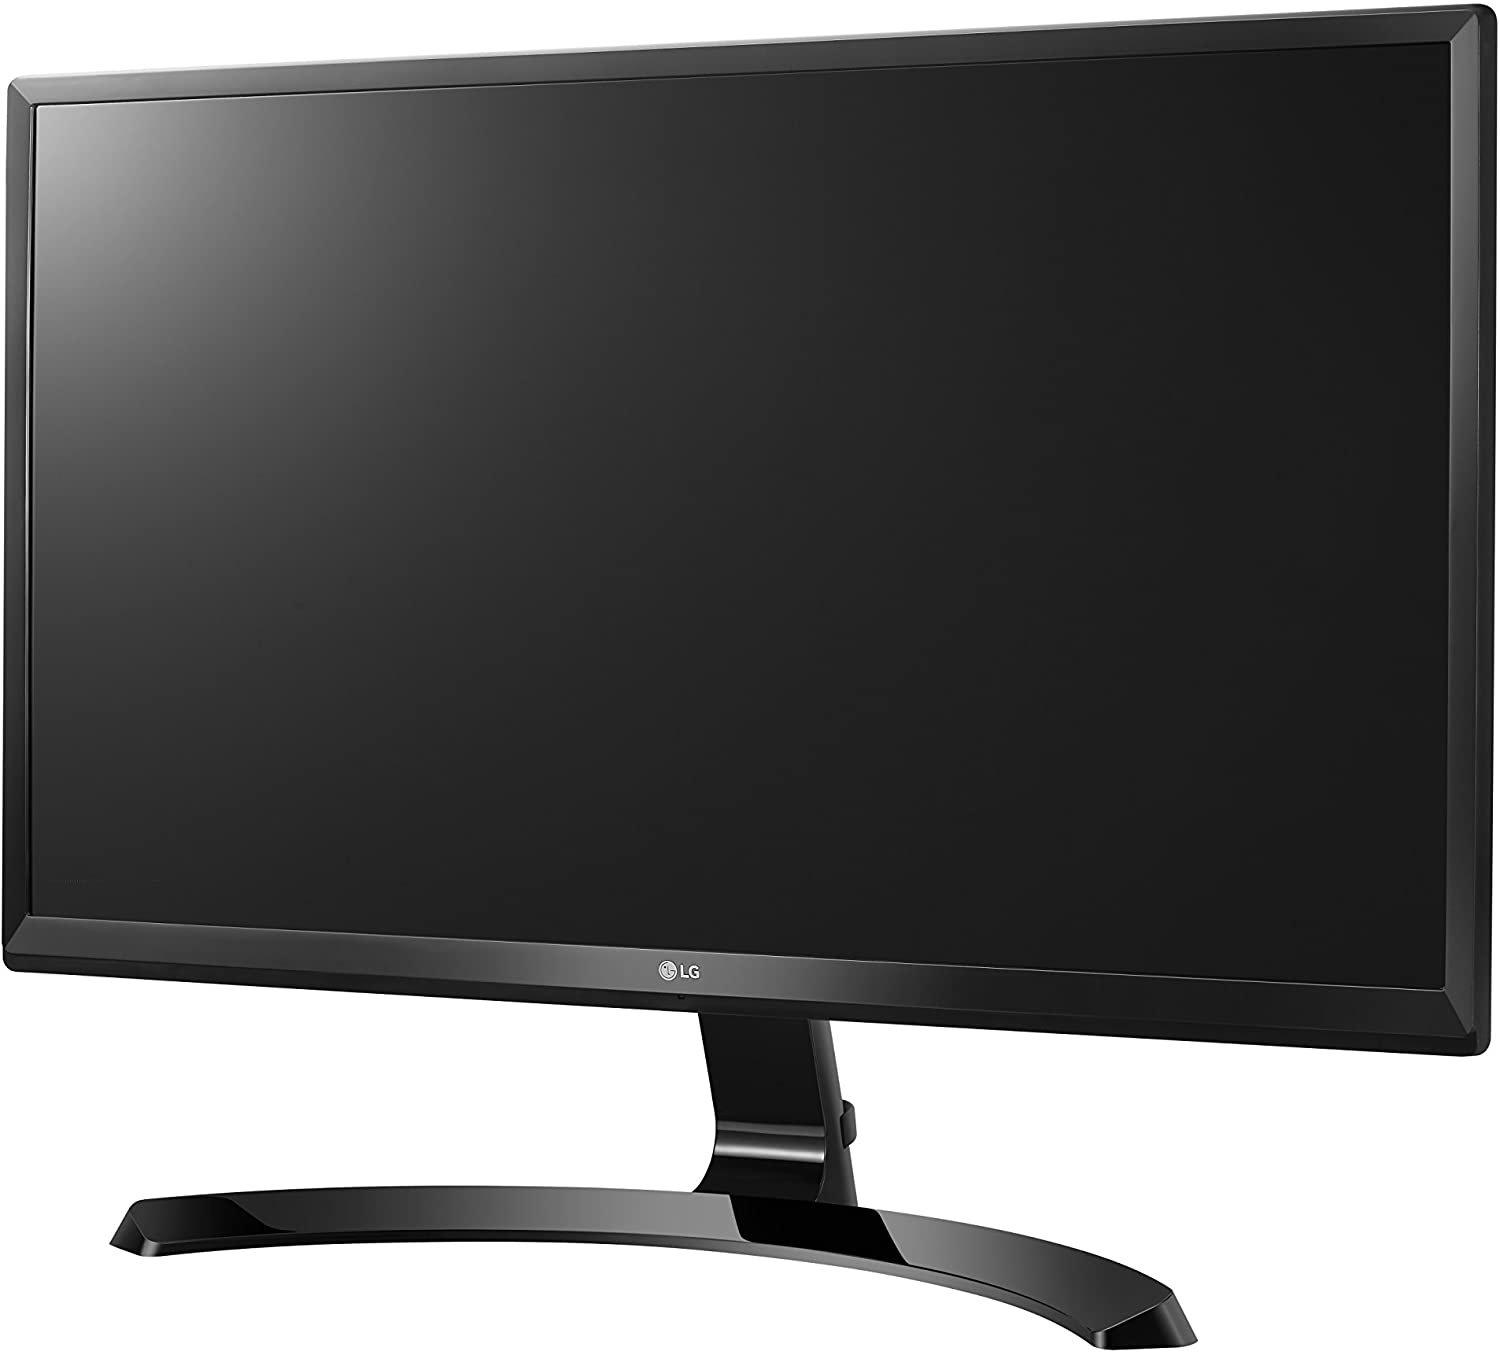 LG 24in 3840x2160 60Hz 5ms IPS LED FreeSync Gaming Monitor 24UD58 